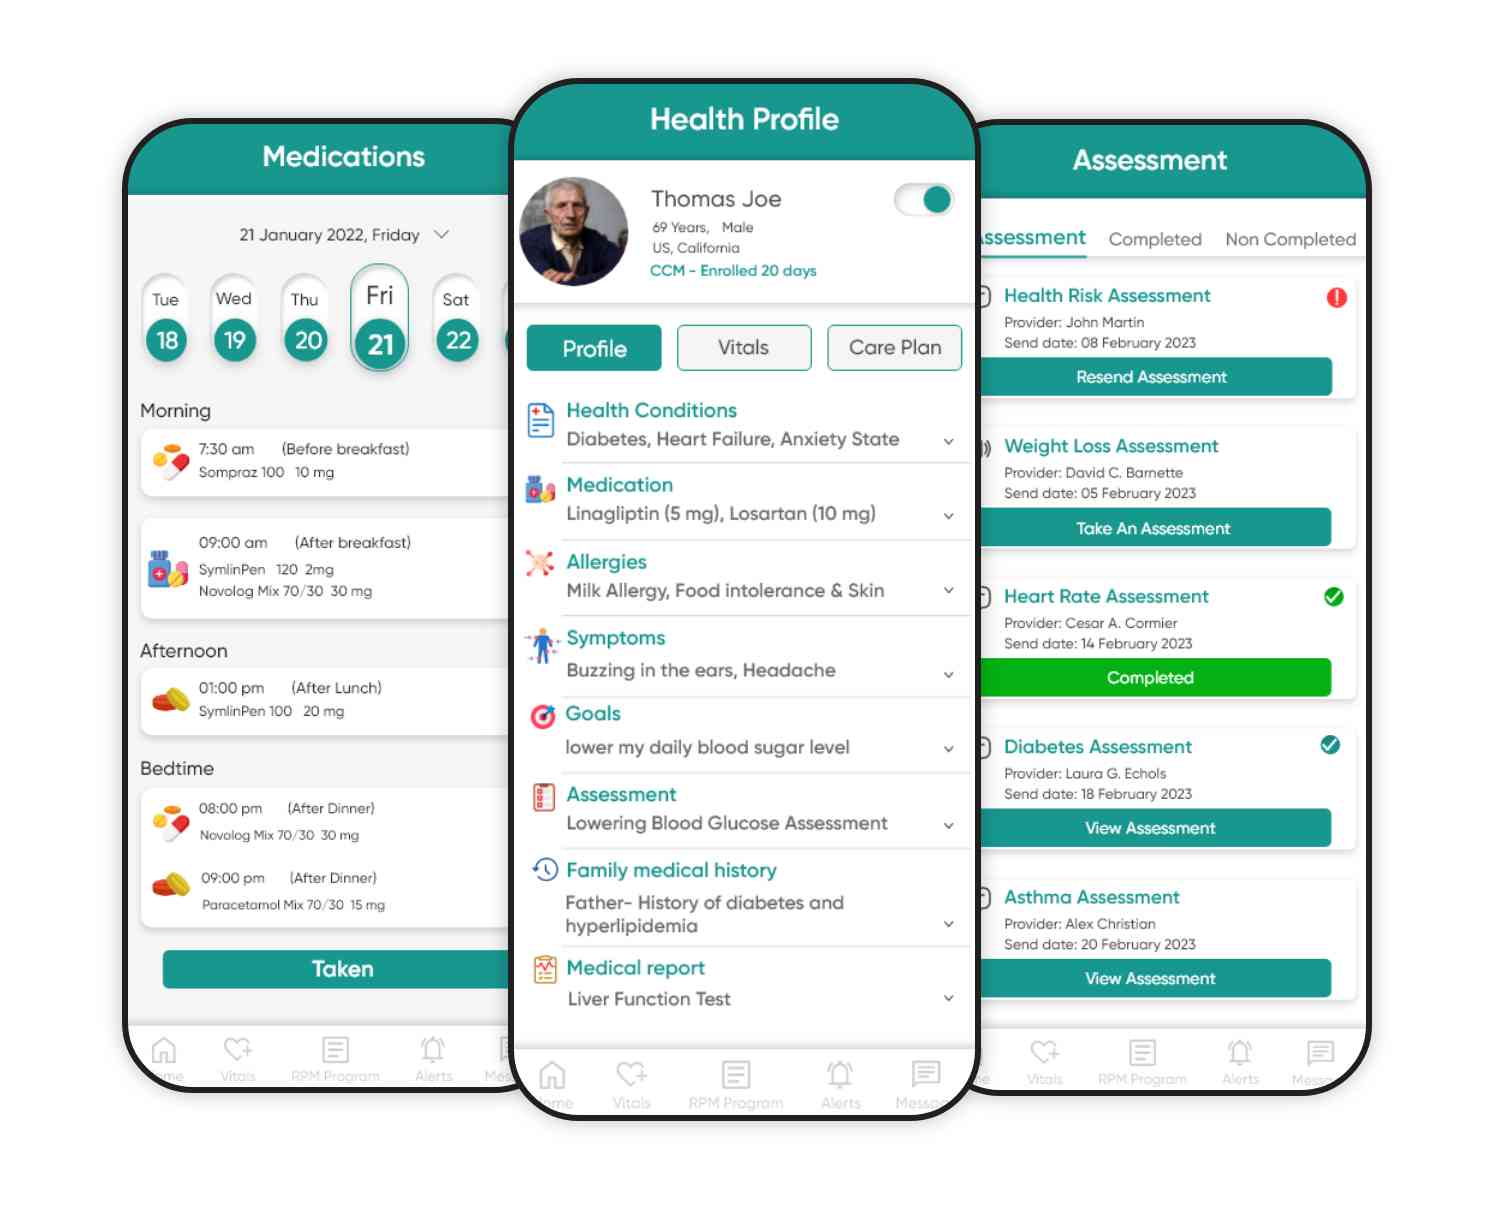 Using a patient mobile app, the patient can access medication details, care plan goals, and educational/assessment materials for review.